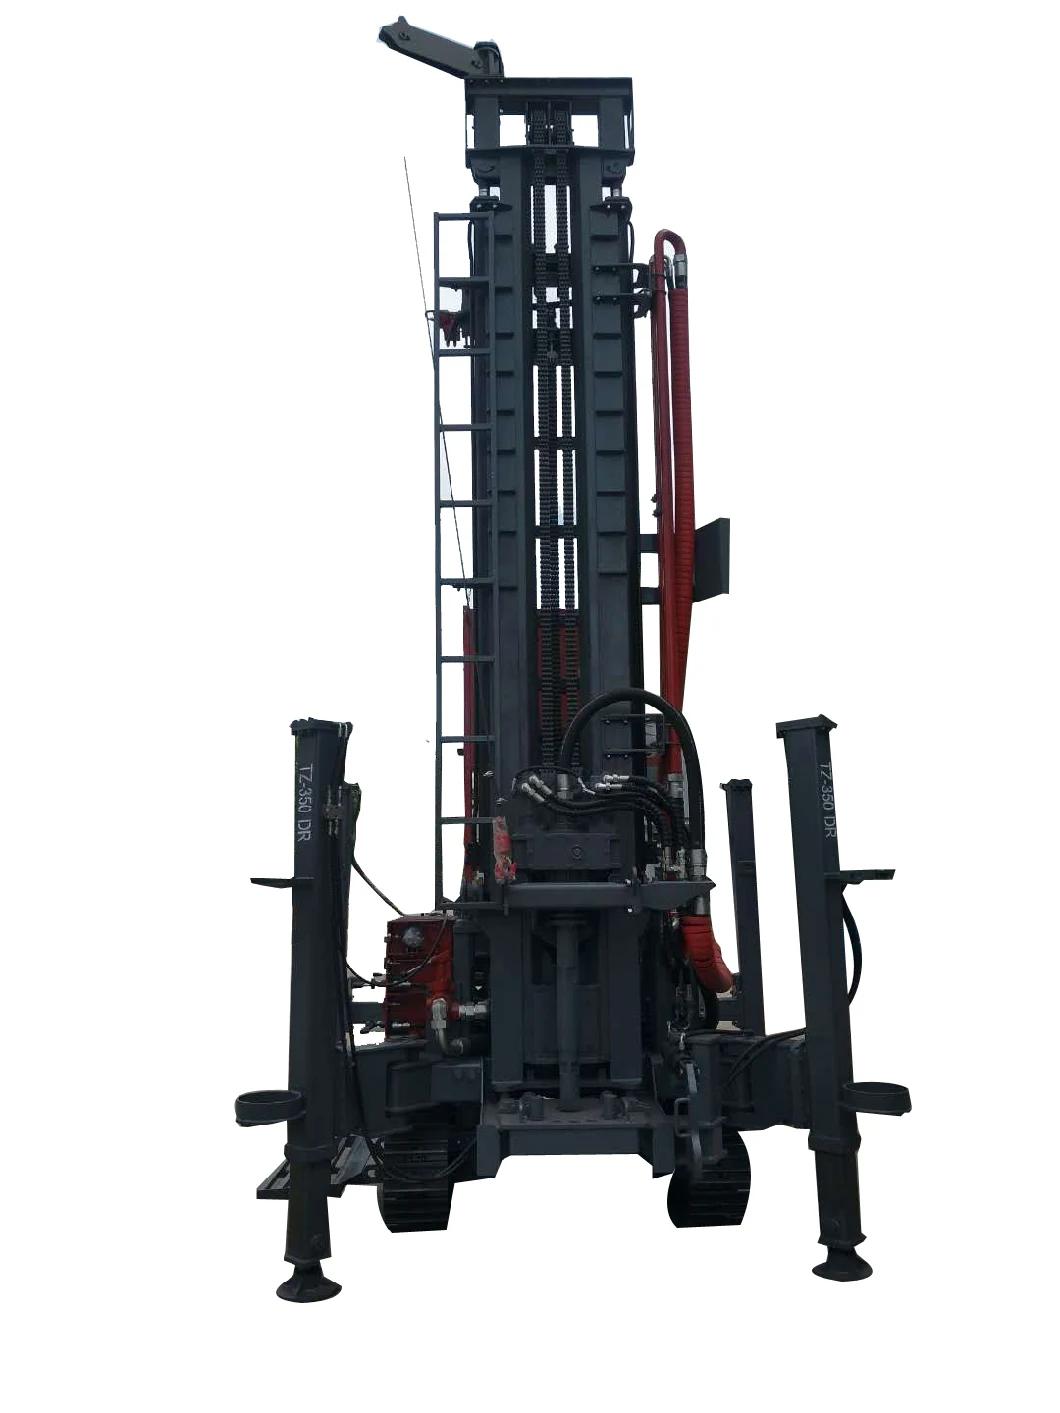 High Drilling Speed 350m Water Well Drilling Rig